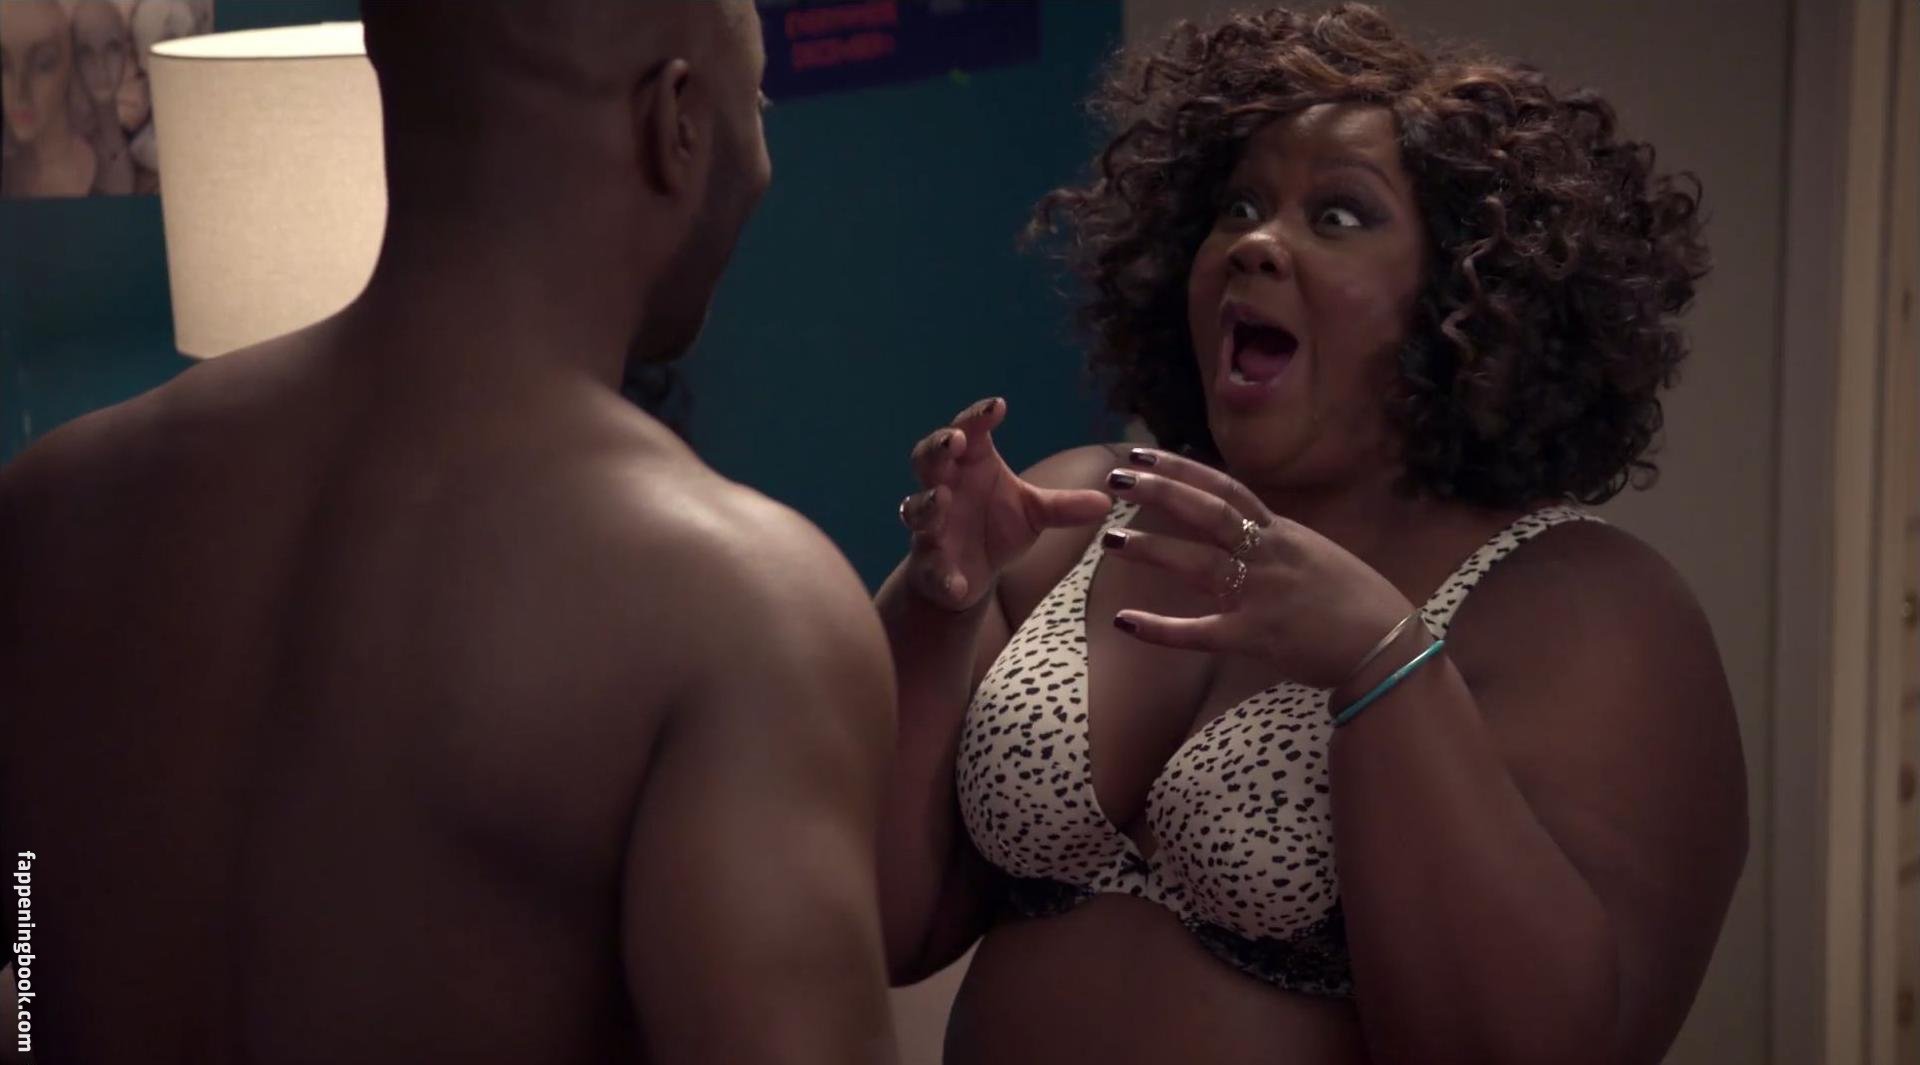 Nude Roles in Movies: Loosely Exactly Nicole (2016-) Nicole Byer Nude Photo...